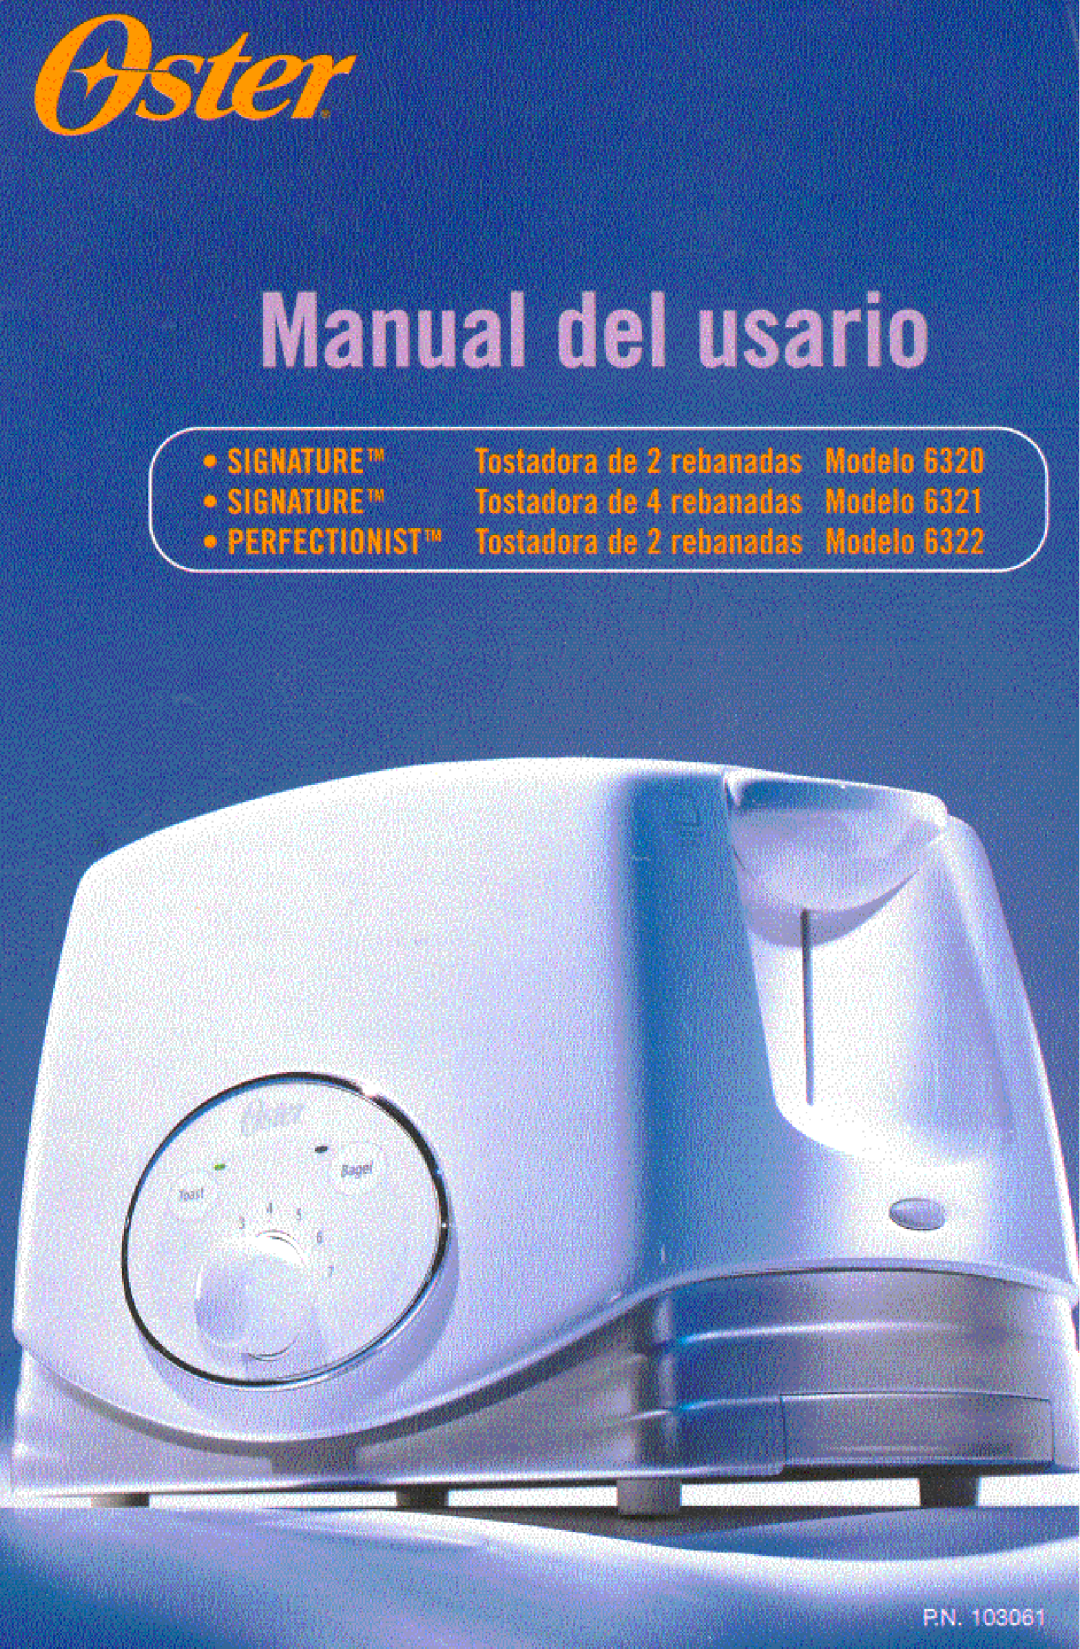 Oster 6321, 6322, 6320 manual 